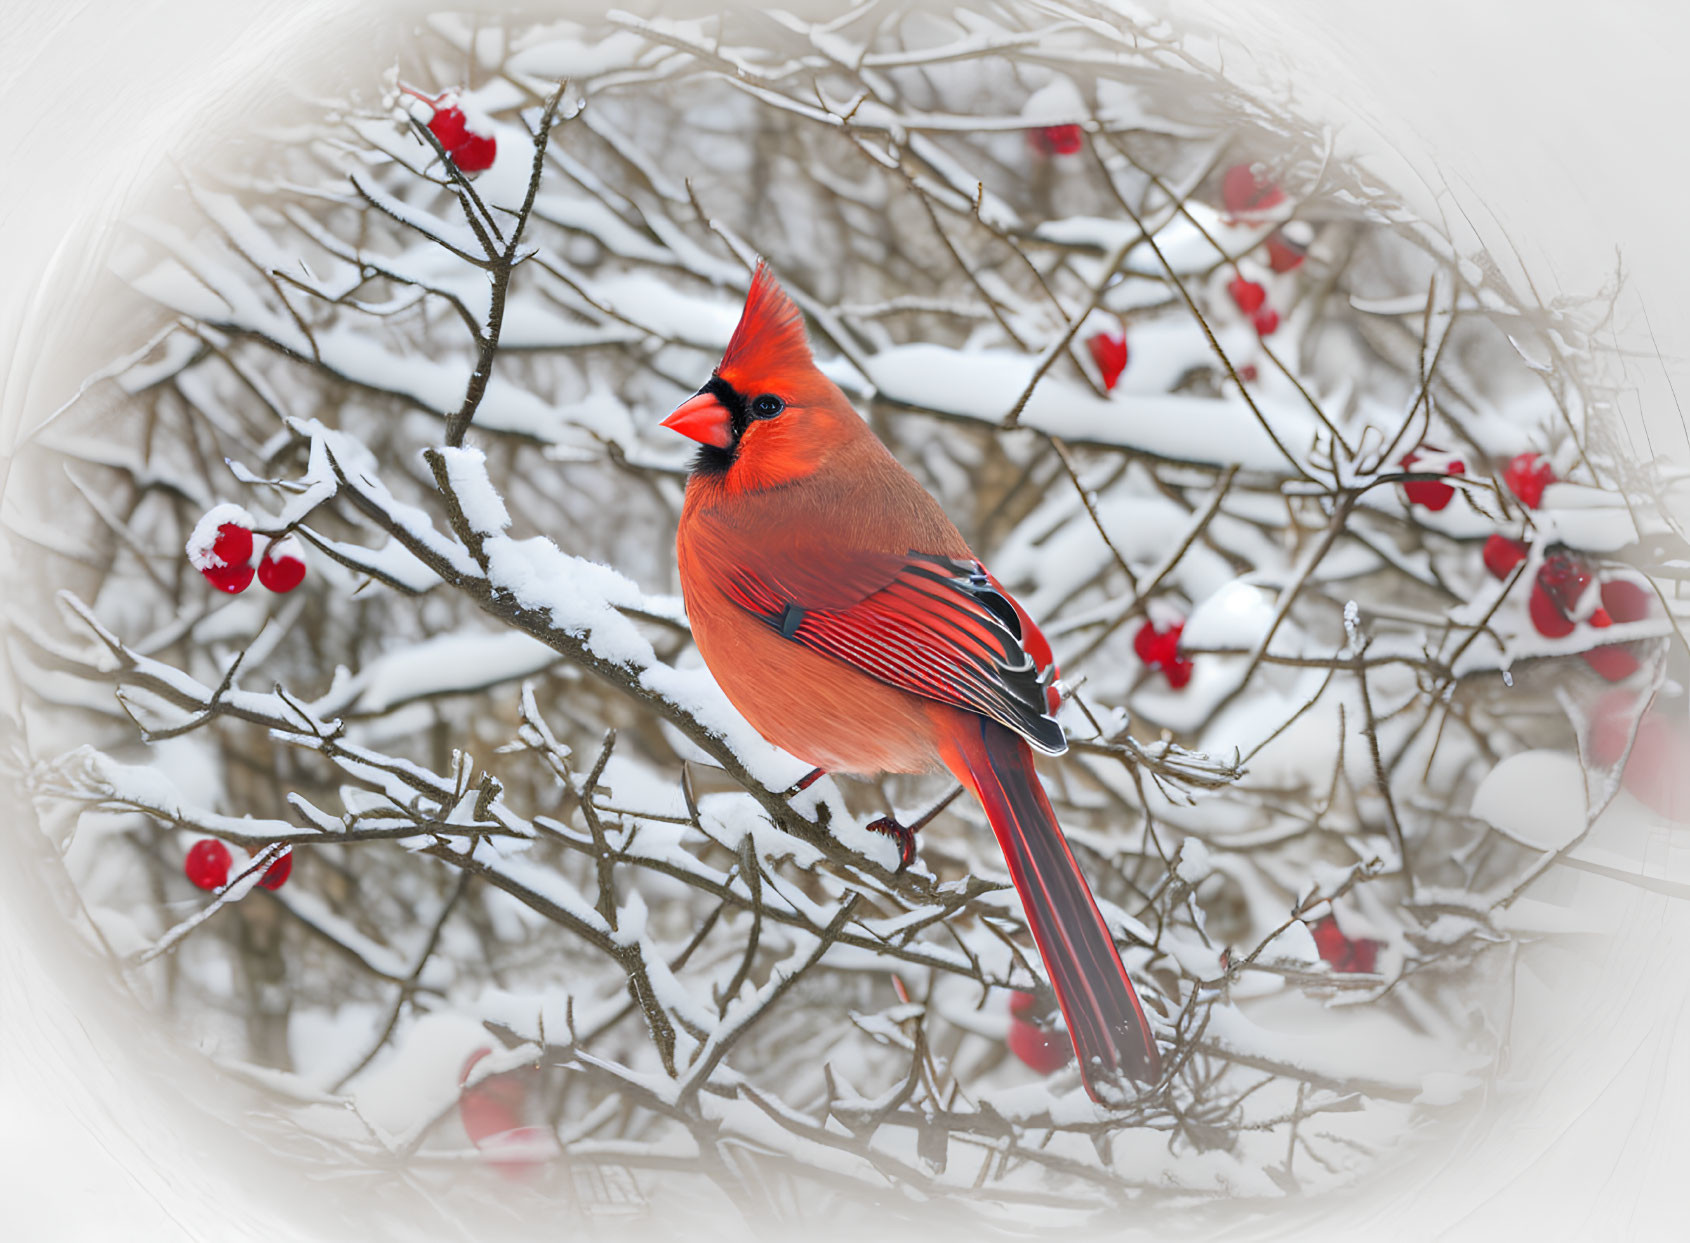 Red cardinal on snowy branch with red berries in wintry backdrop